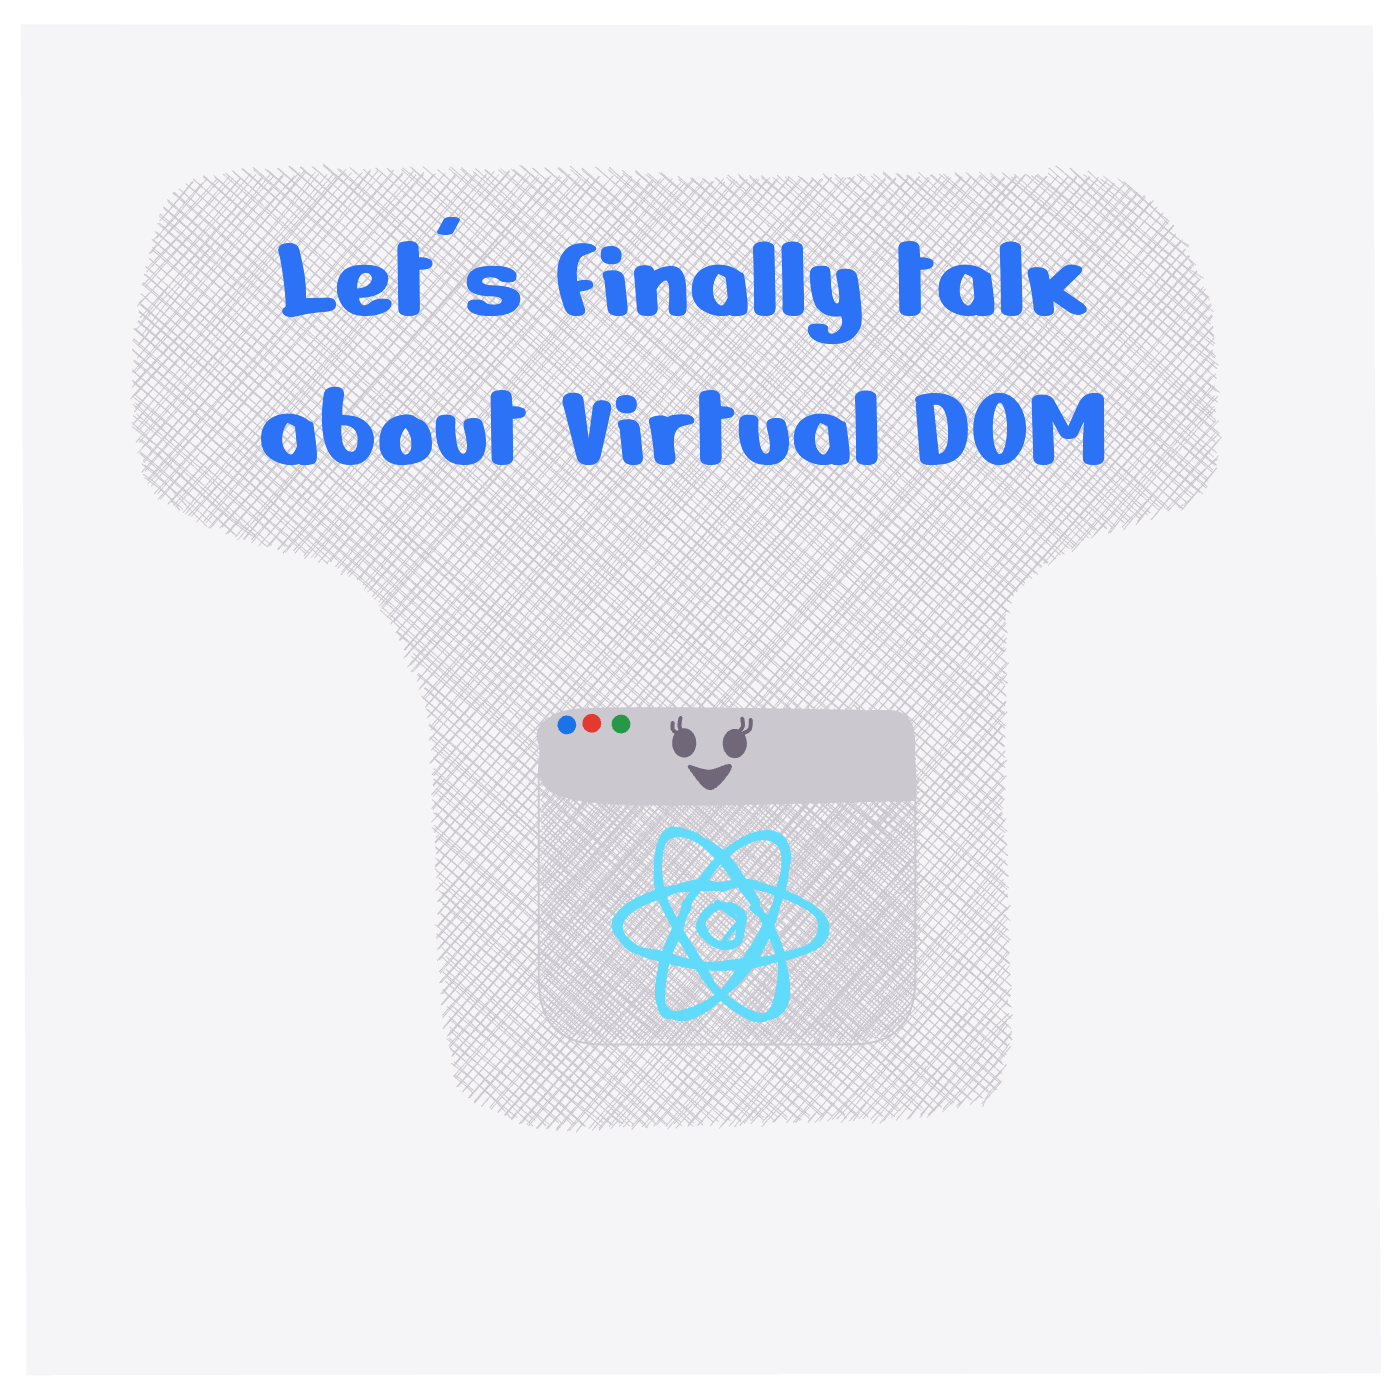 Let's finally talk about Virtual DOM